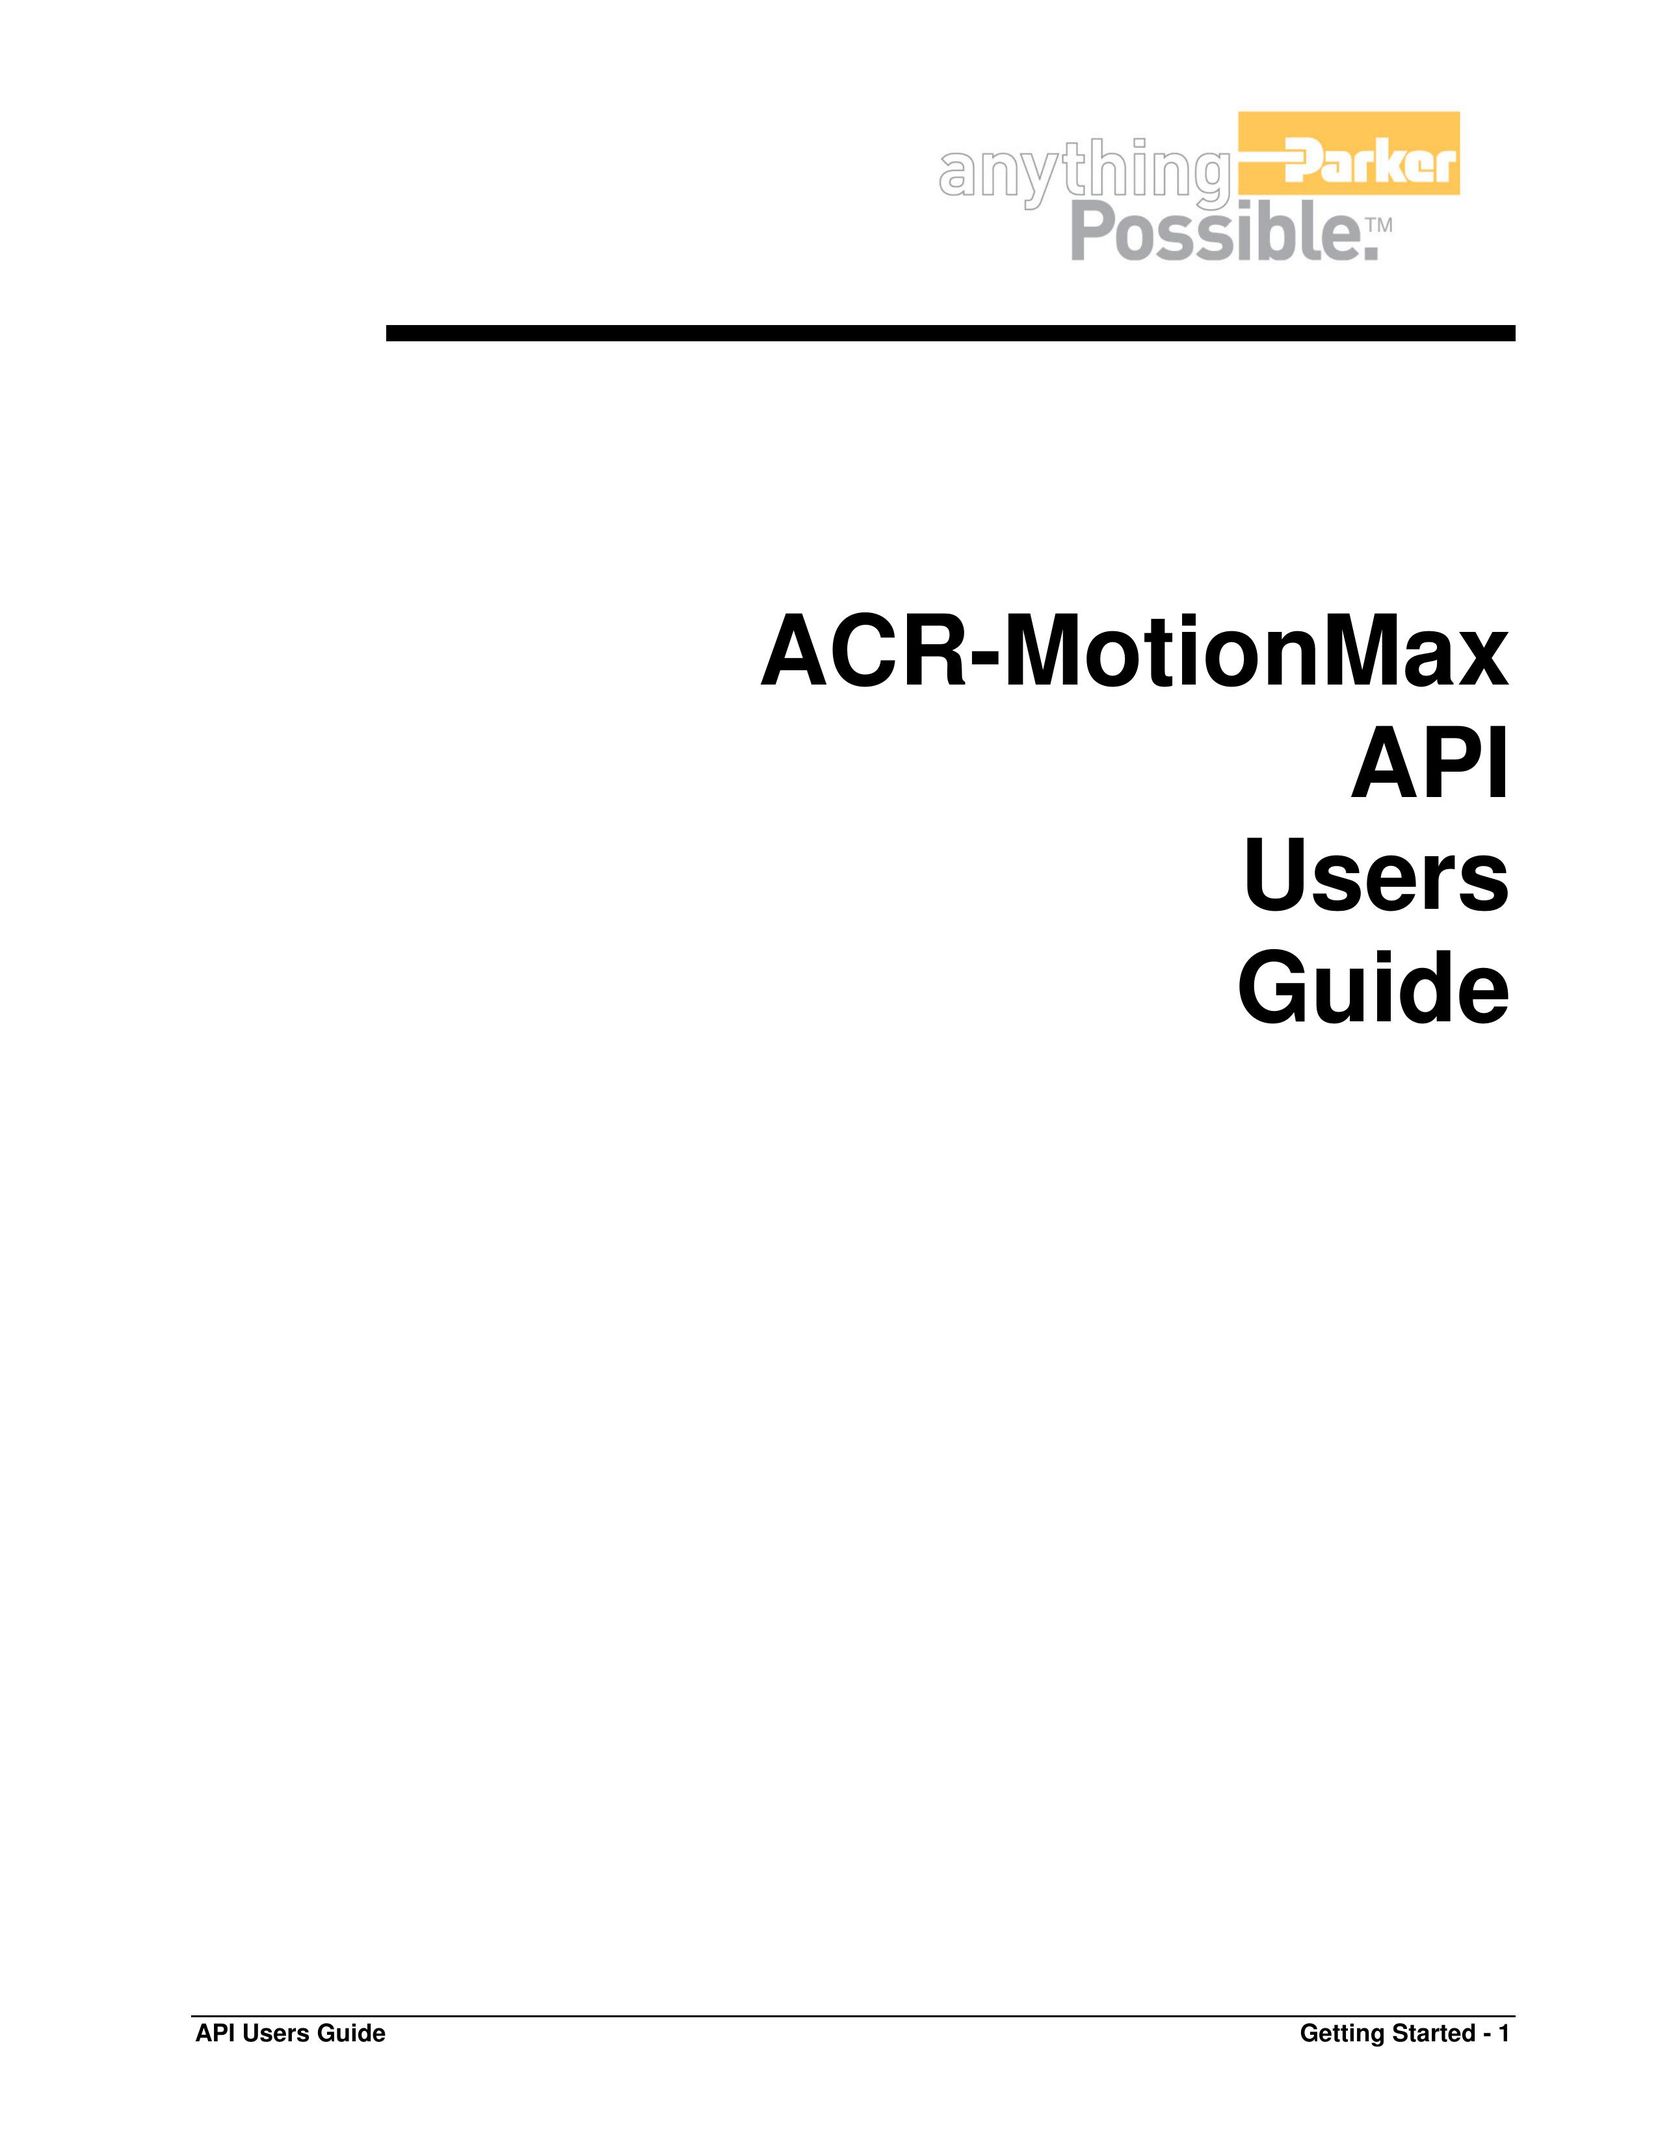 Parker Hannifin acr-motion max api users guide Home Theater Server User Manual